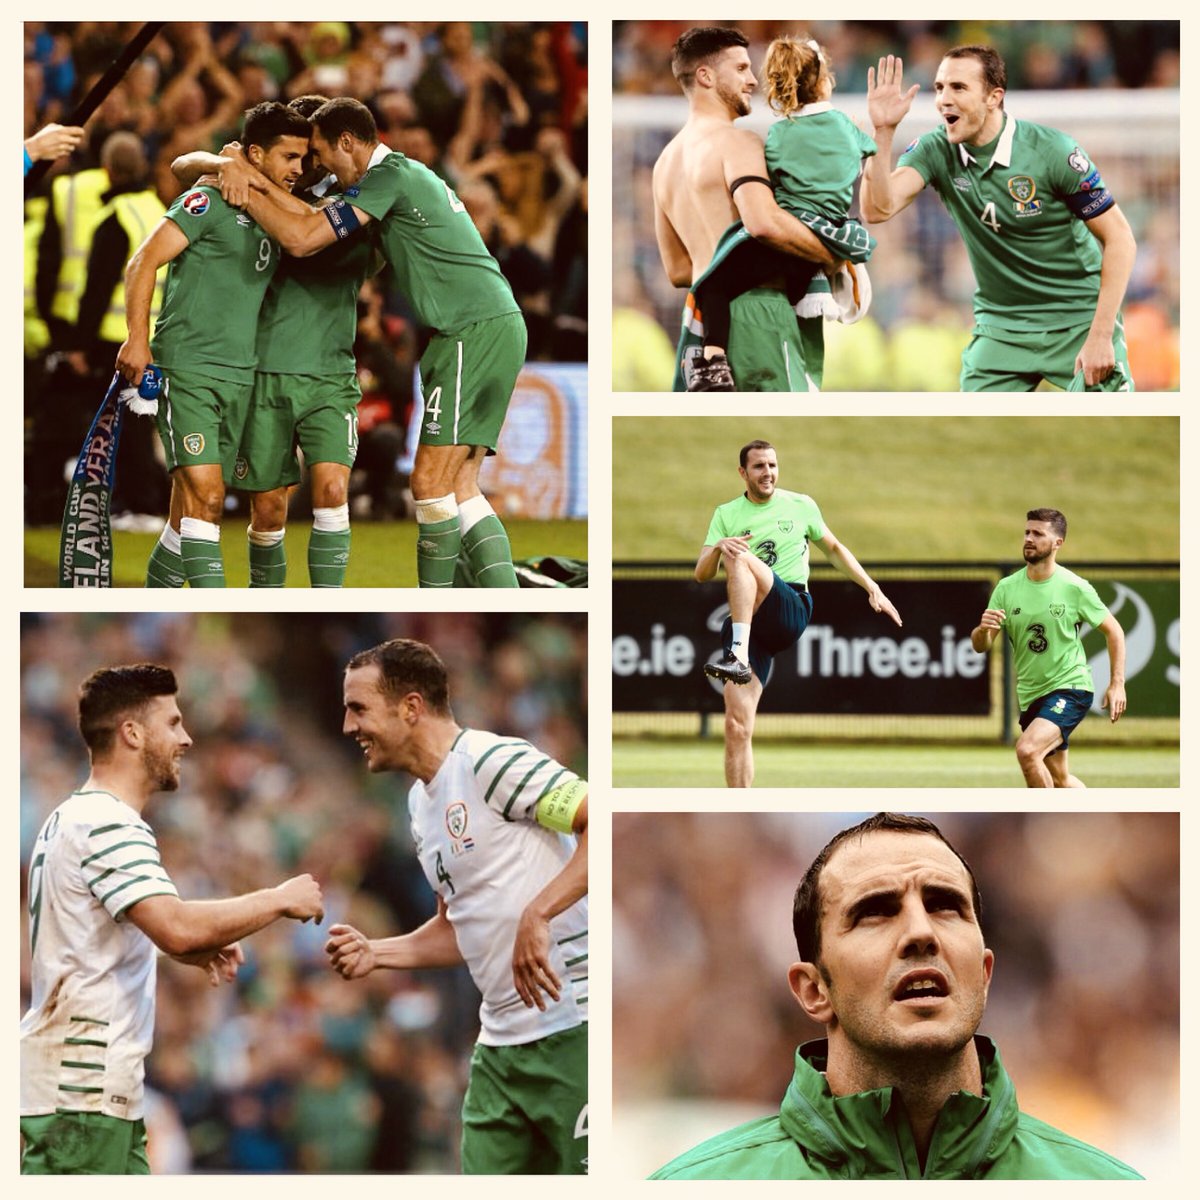 Since my first squad in ‘07 Josh has been a role model to me. Professional, humble & always a leader. It was an honour to play along side you pal & congratulations on an amazing international career #ThanksJosh @FAIreland